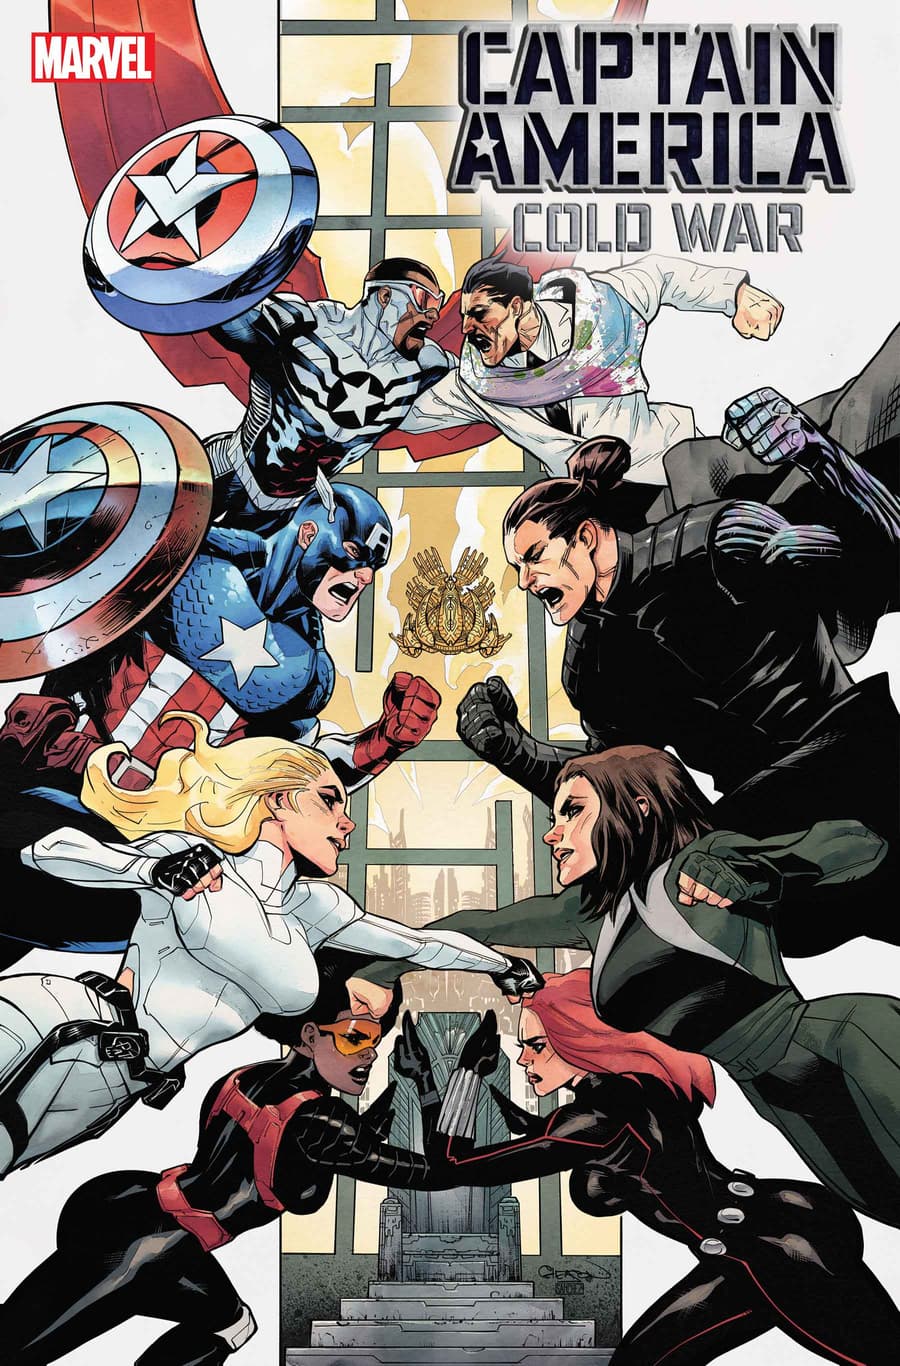 CAPTAIN AMERICA: COLD WAR OMEGA #1 cover by Patrick Gleason